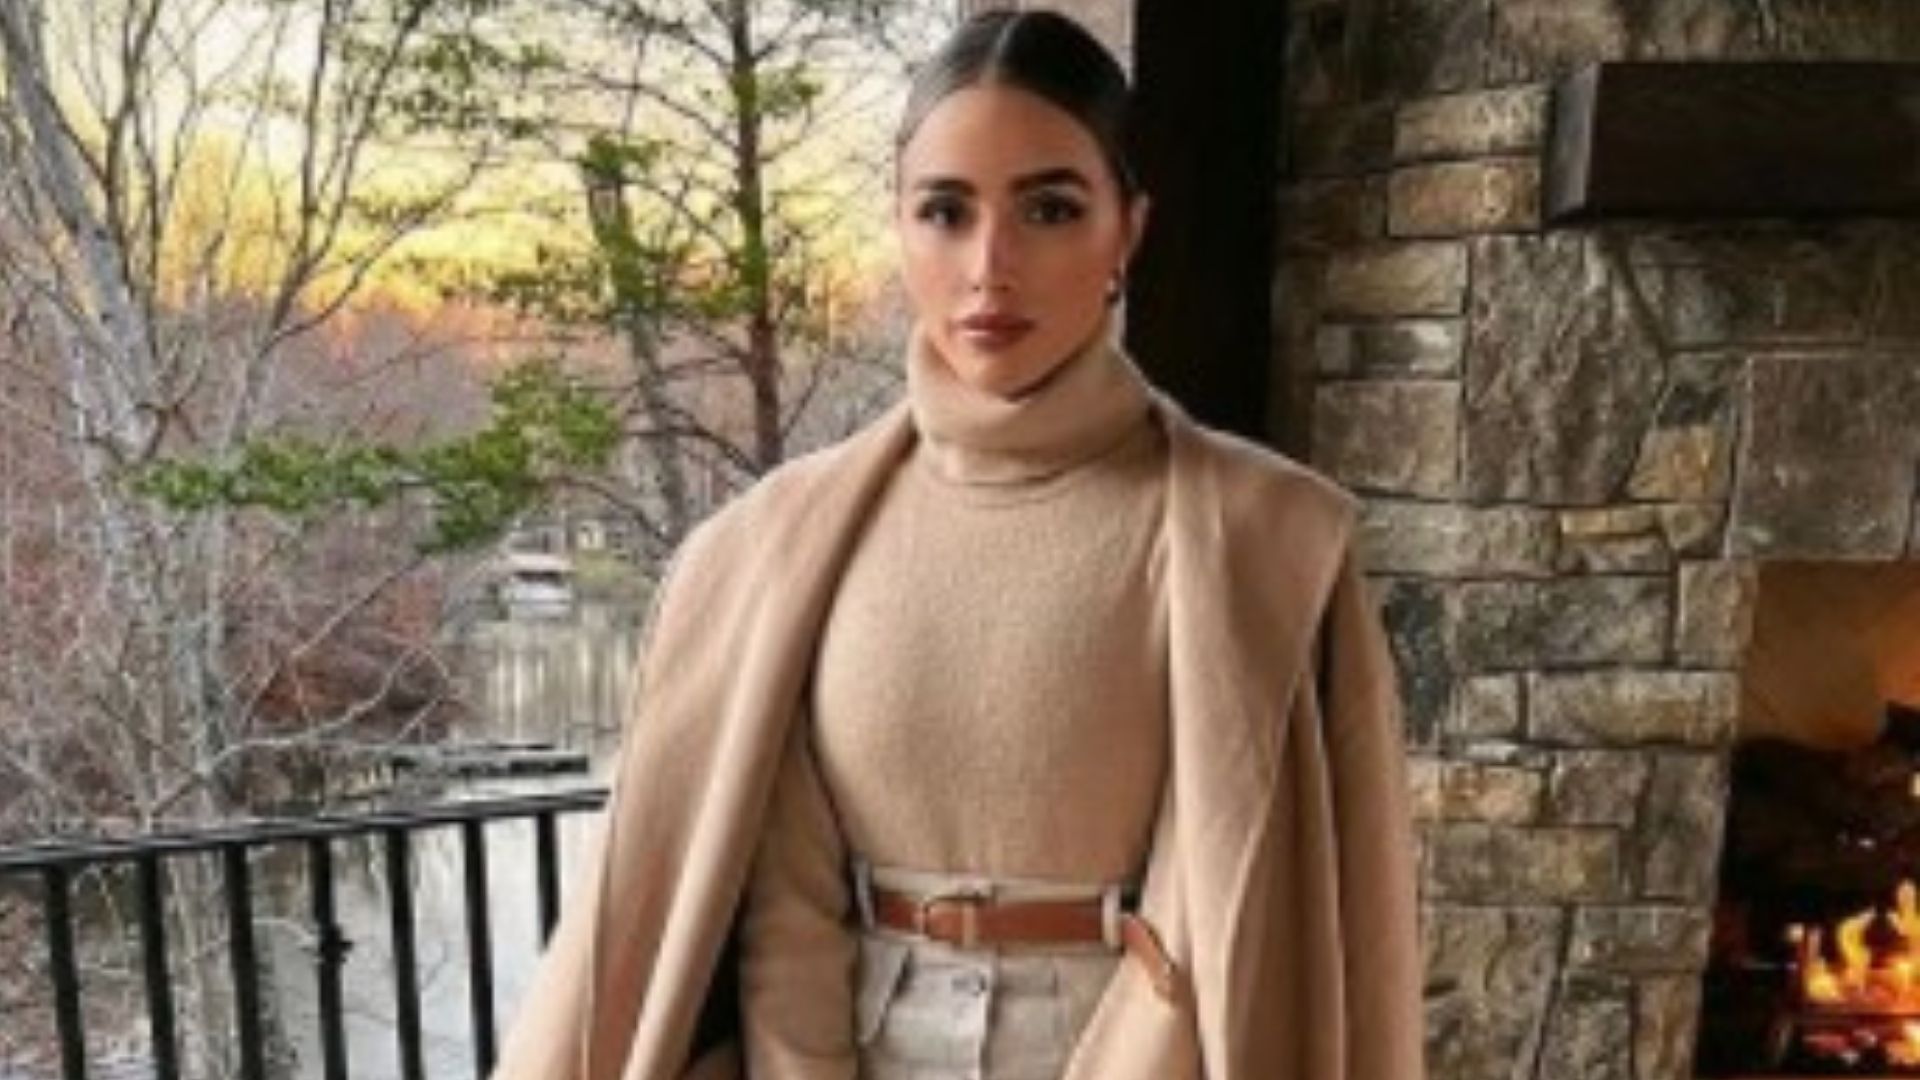 AIRLINE FORCES MODEL OLIVIA CULPO TO COVER UP OR NOT BOARD